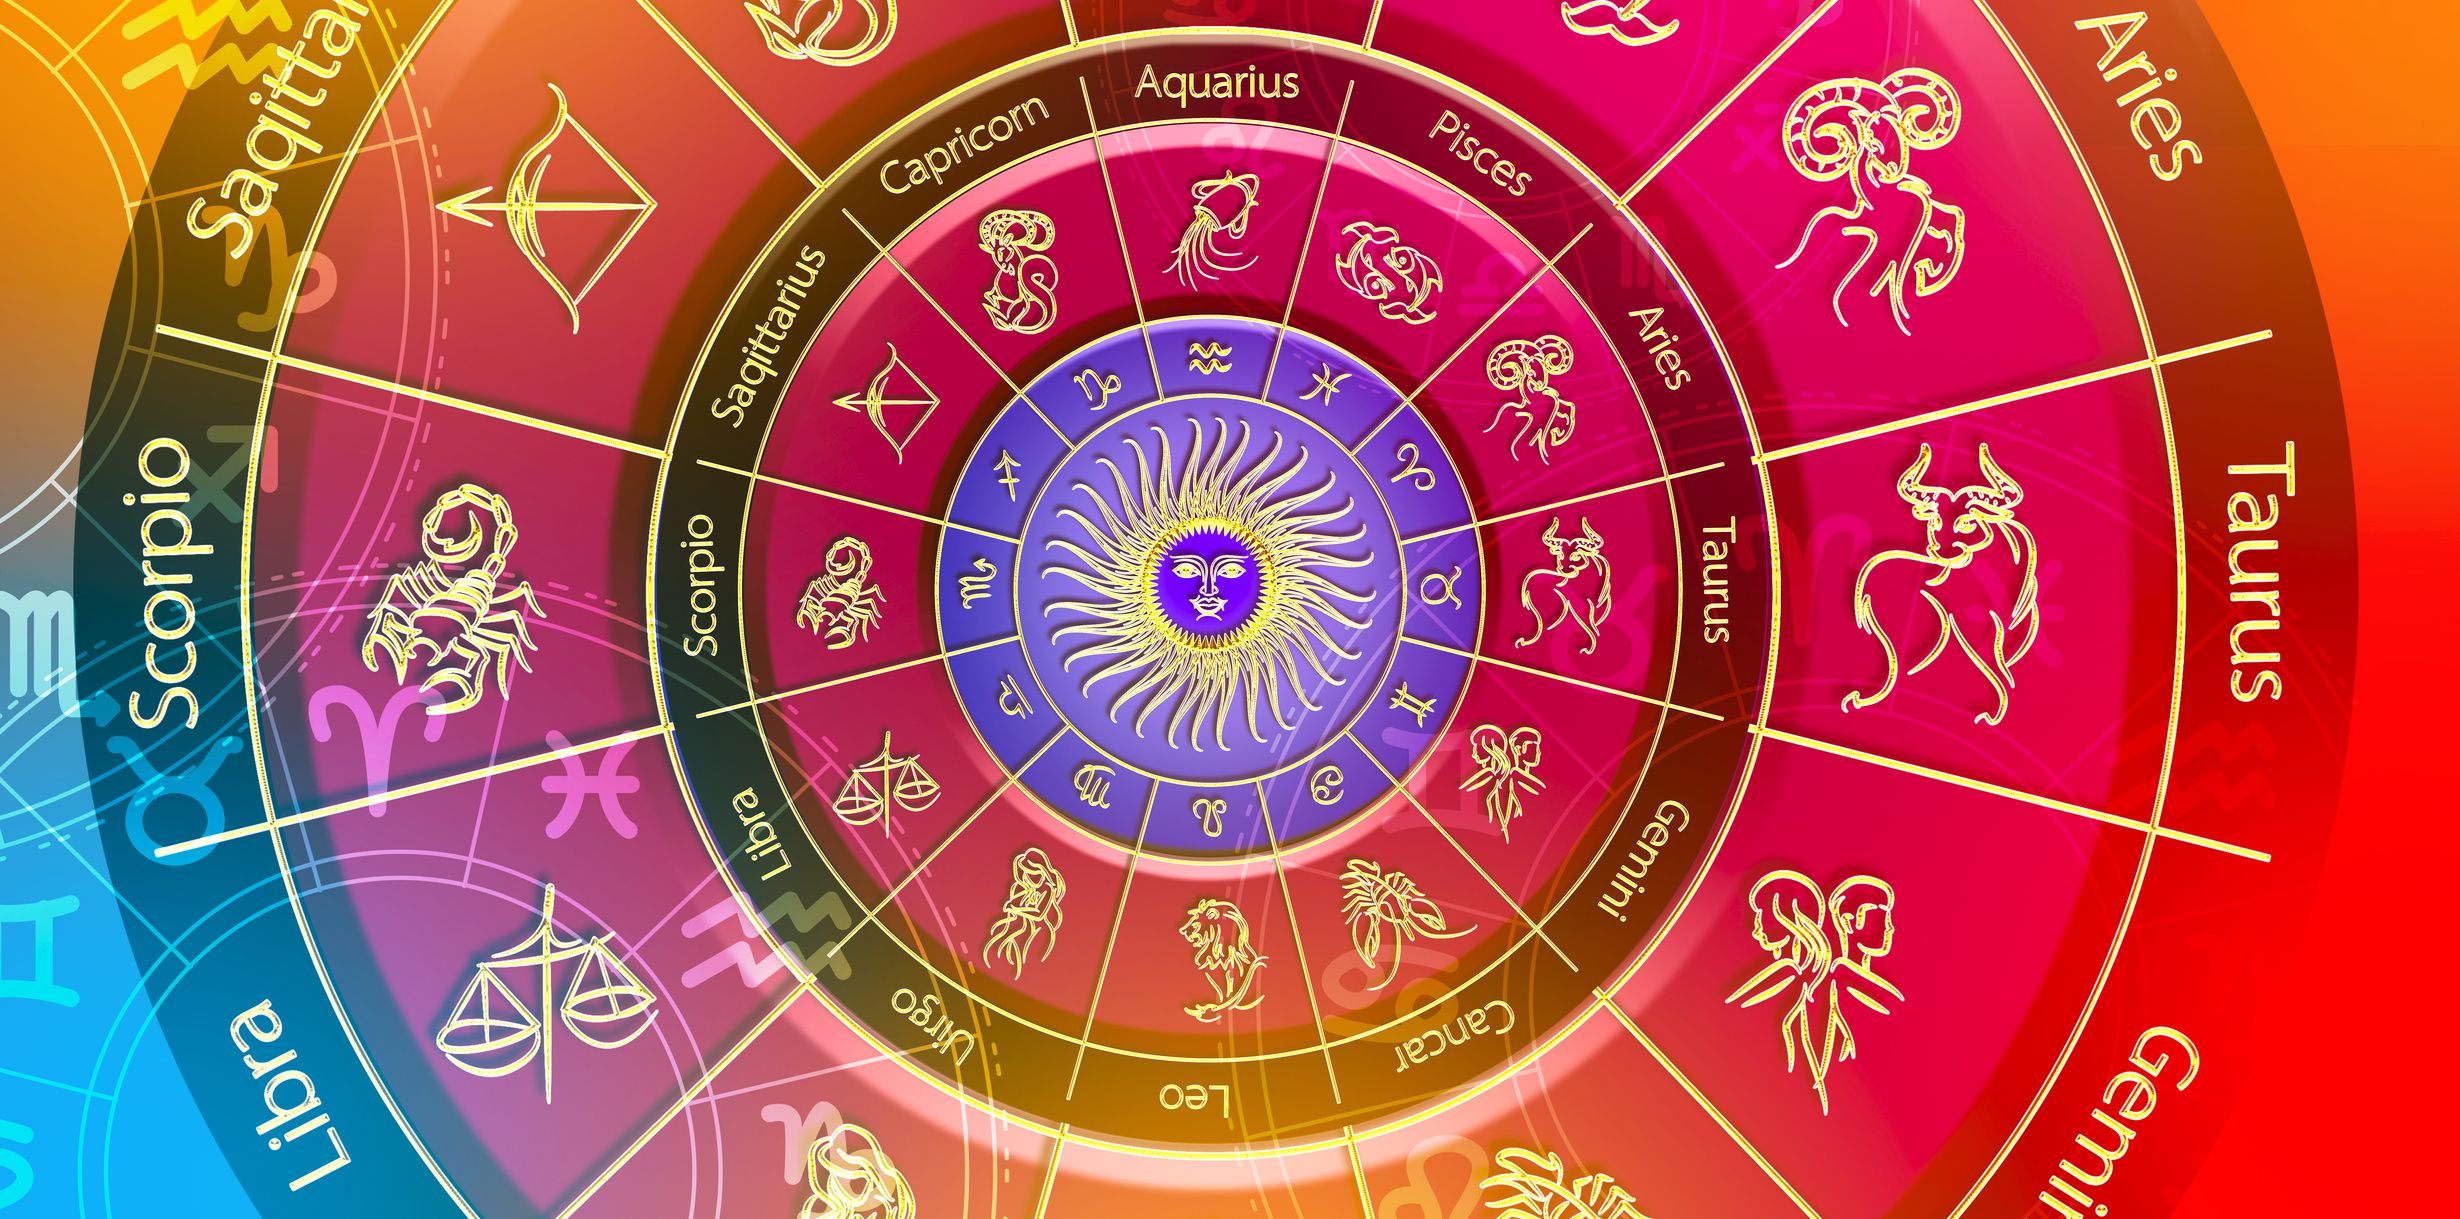 What Are The Benefits Of Knowing Your Birthdate Astrology?